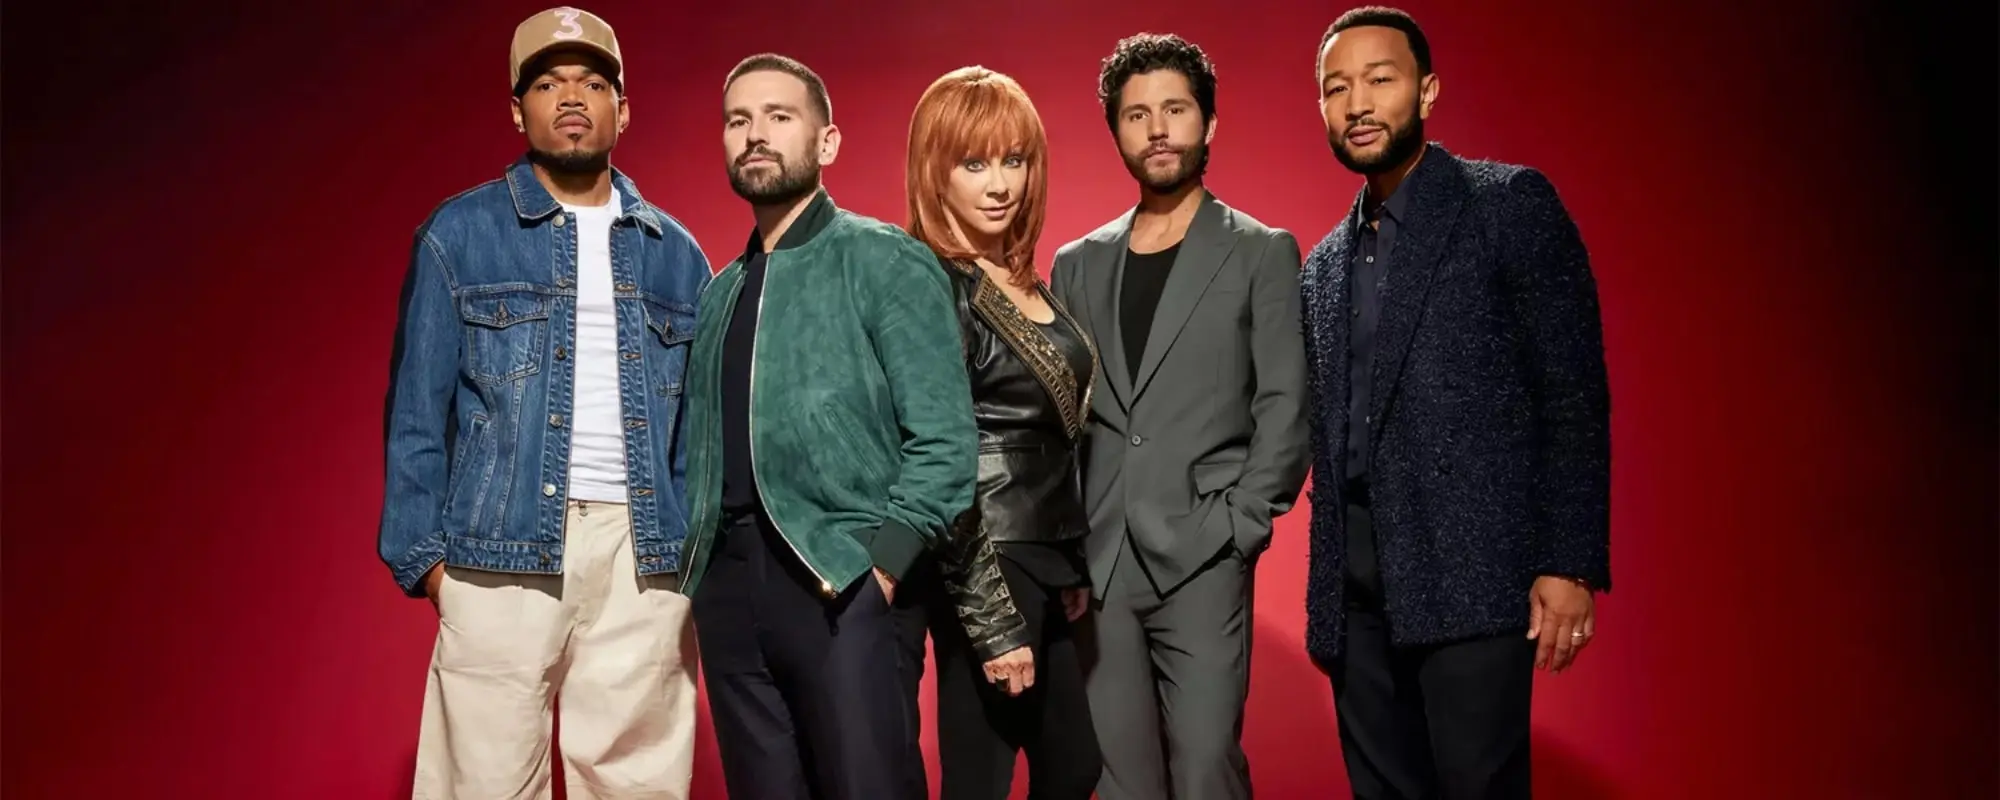 ‘The Voice’: Take a Look at the Teams for Season 25